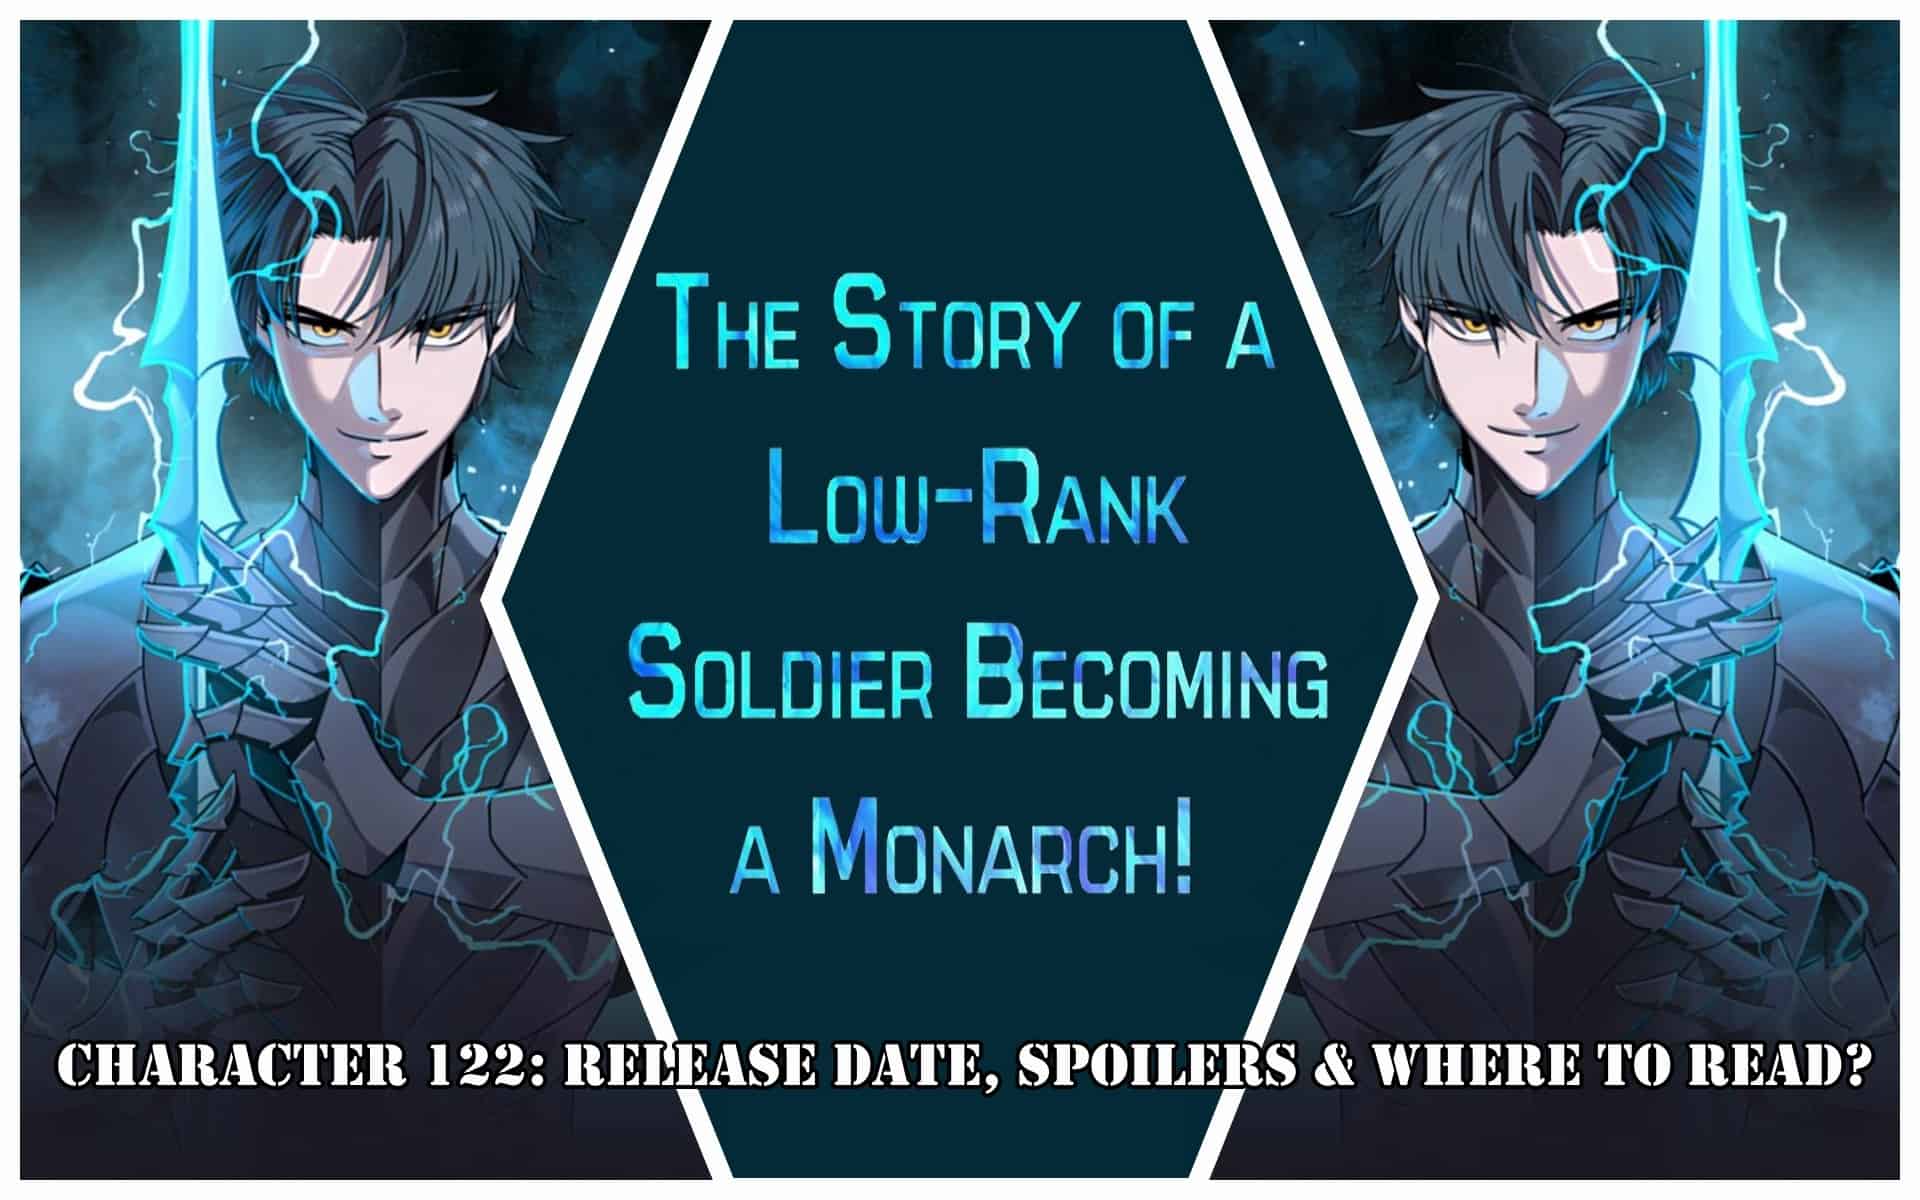 The Story Of A Low-Rank Soldier Becoming A Monarch Character 122: Release Date, Spoilers & Where to Read?